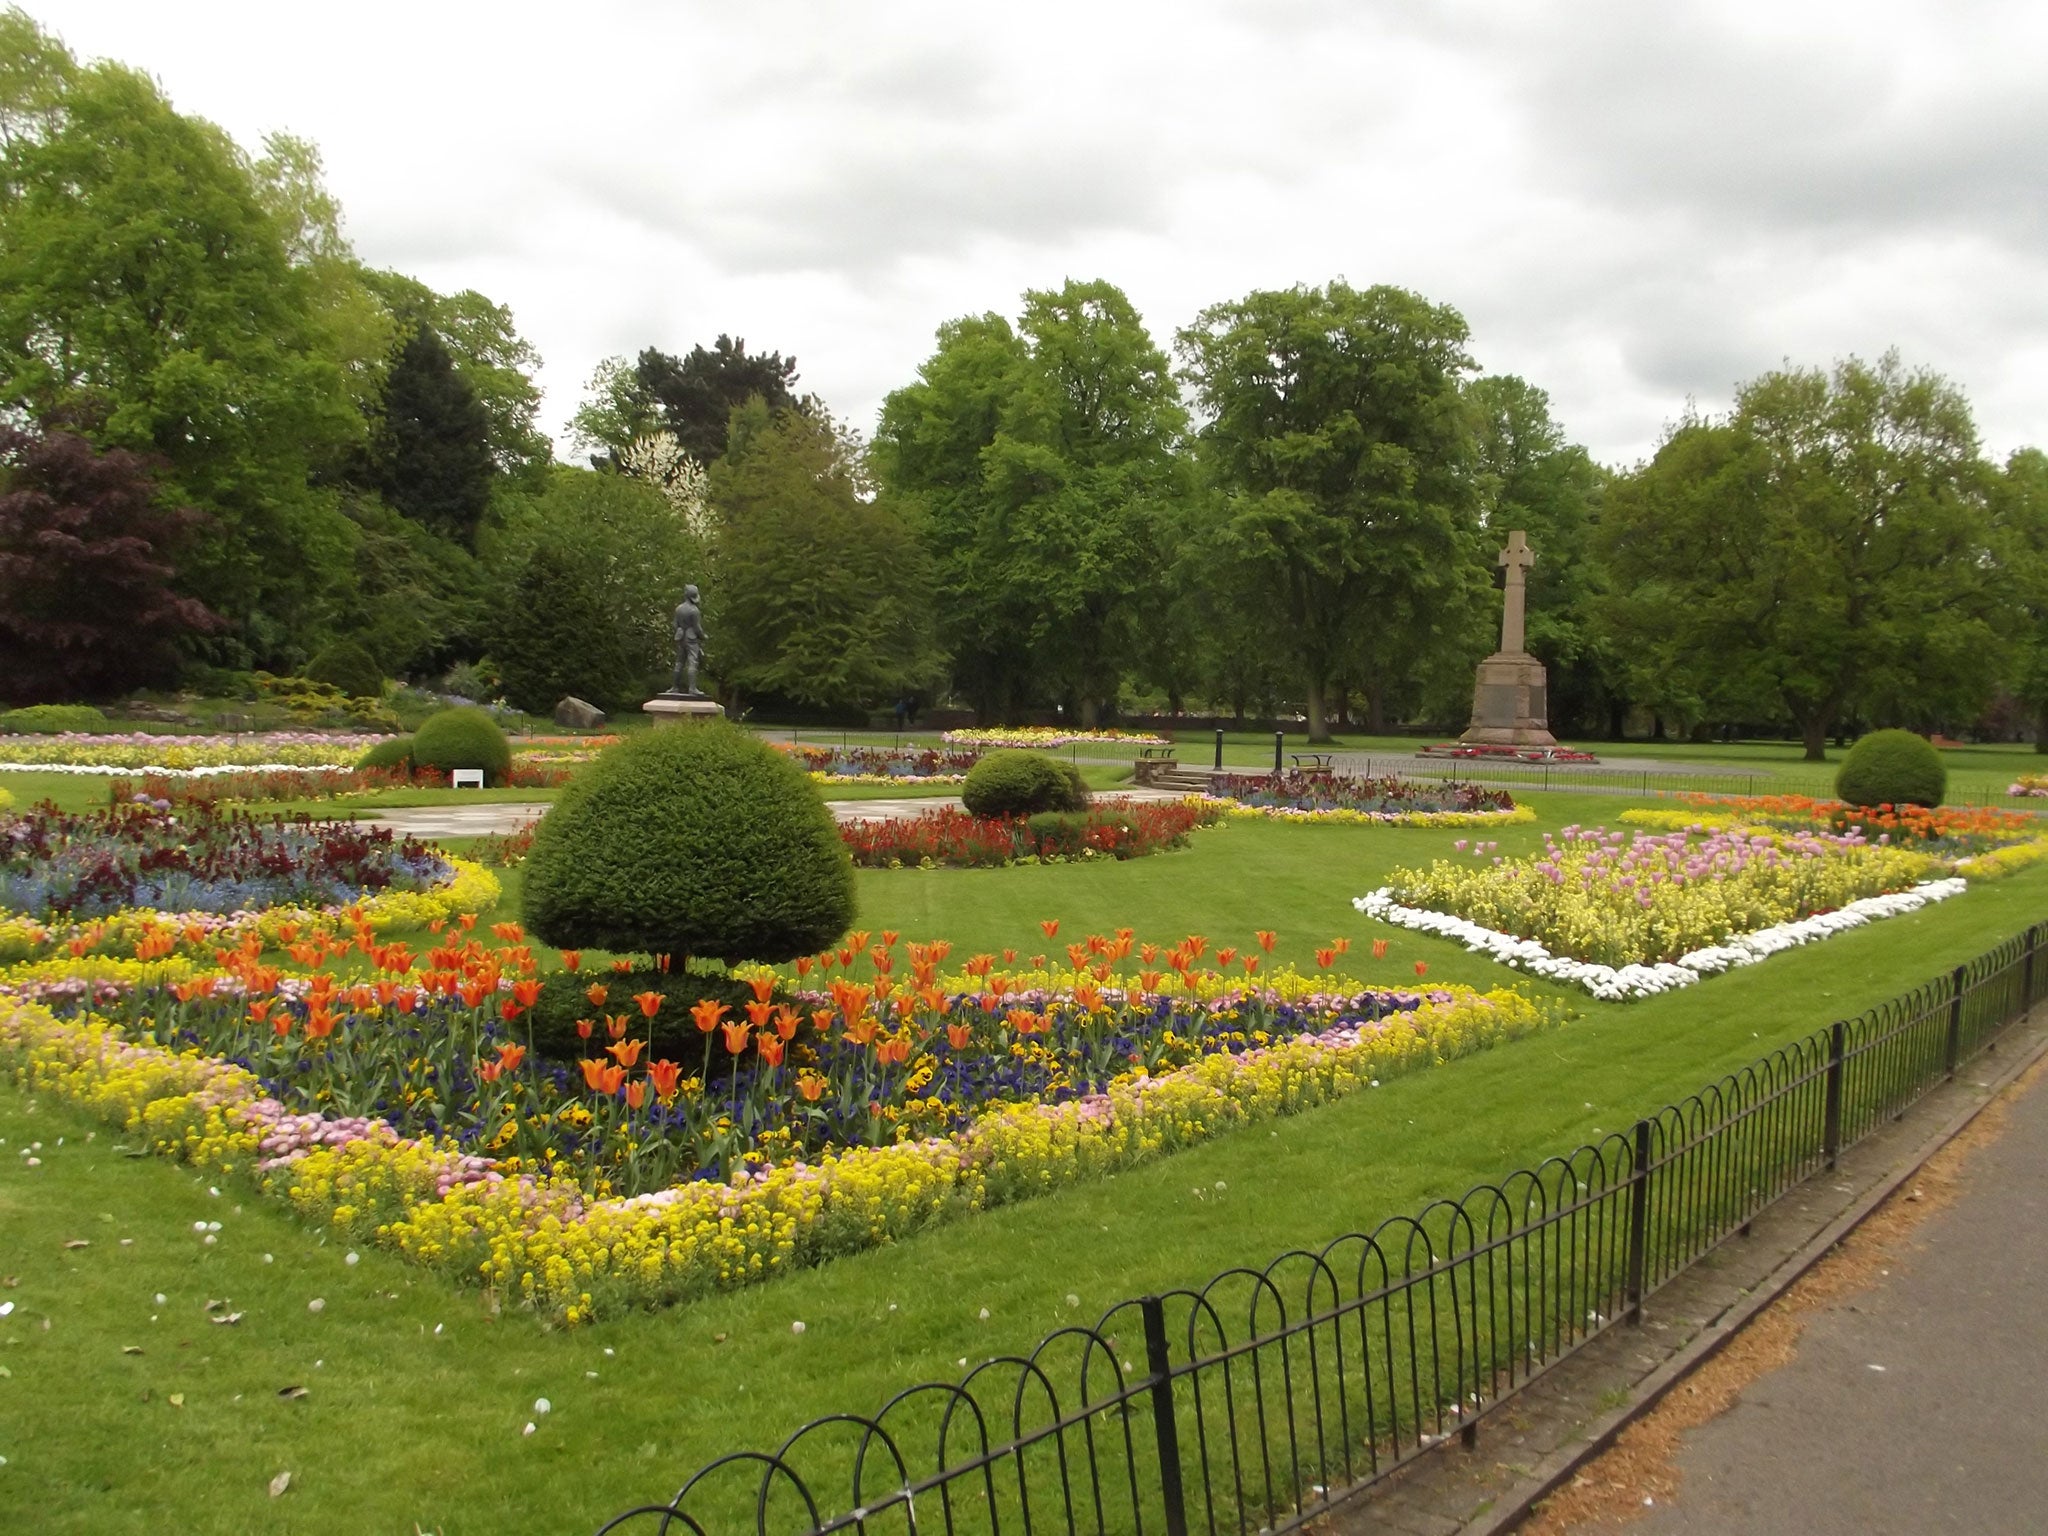 Riversley Park in Nuneaton, where two girls were assaulted